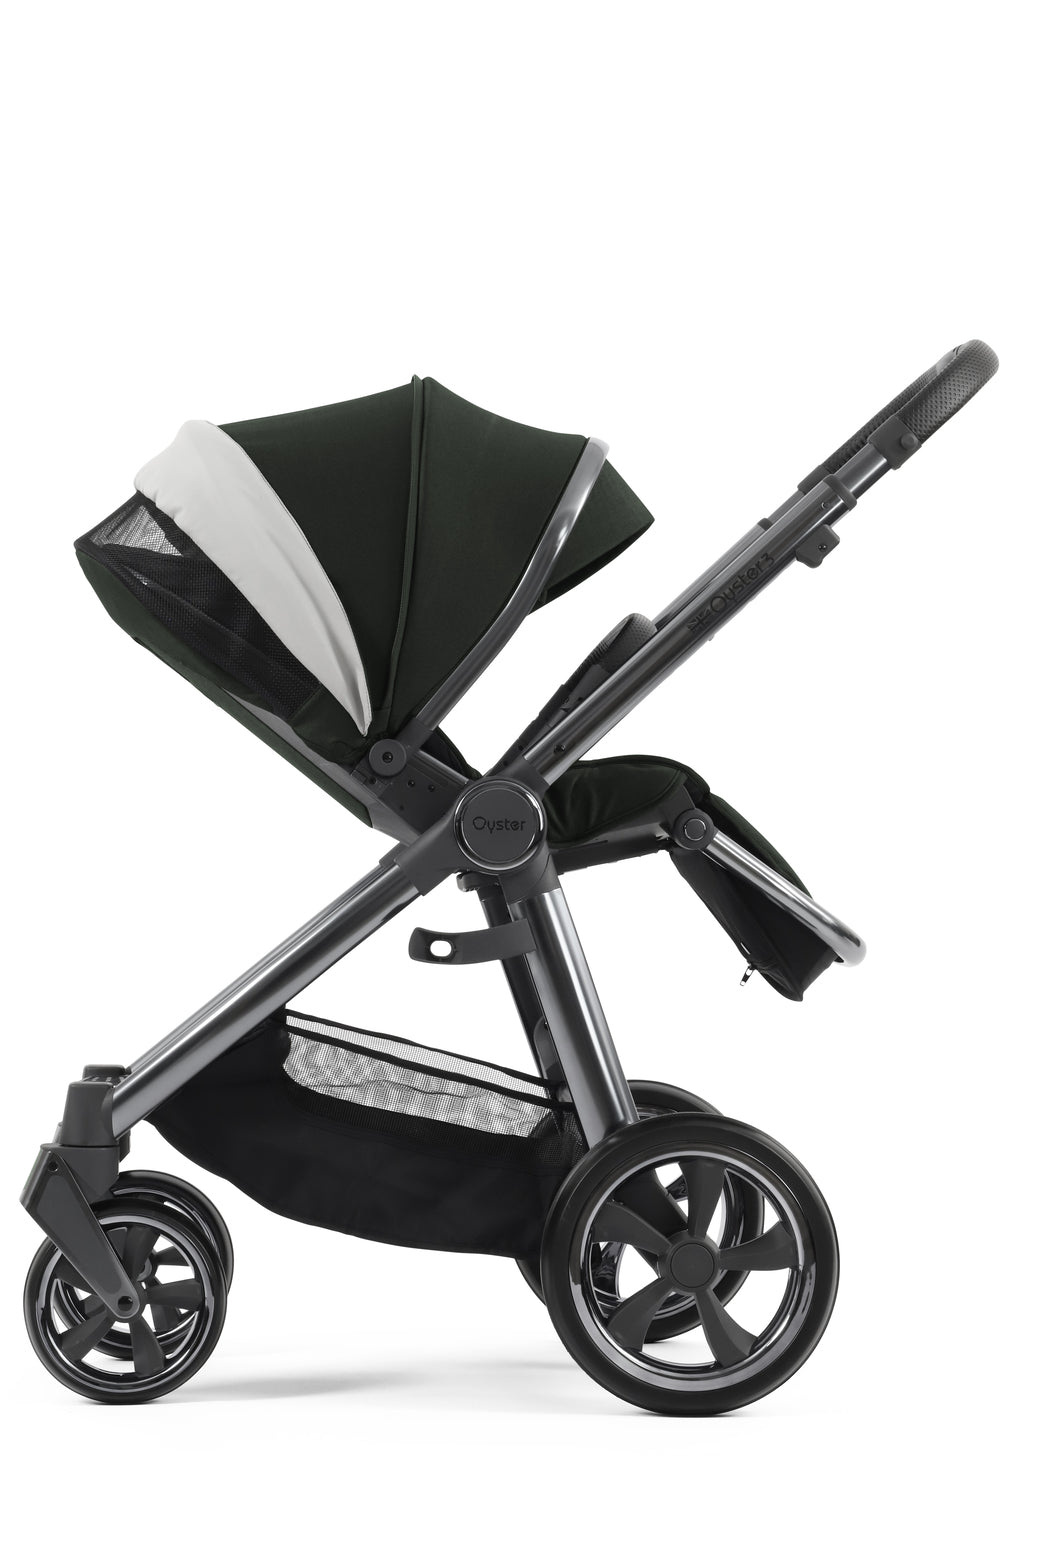 Babystyle Oyster 3 Pushchair + Carrycot - Black Olive -  | For Your Little One